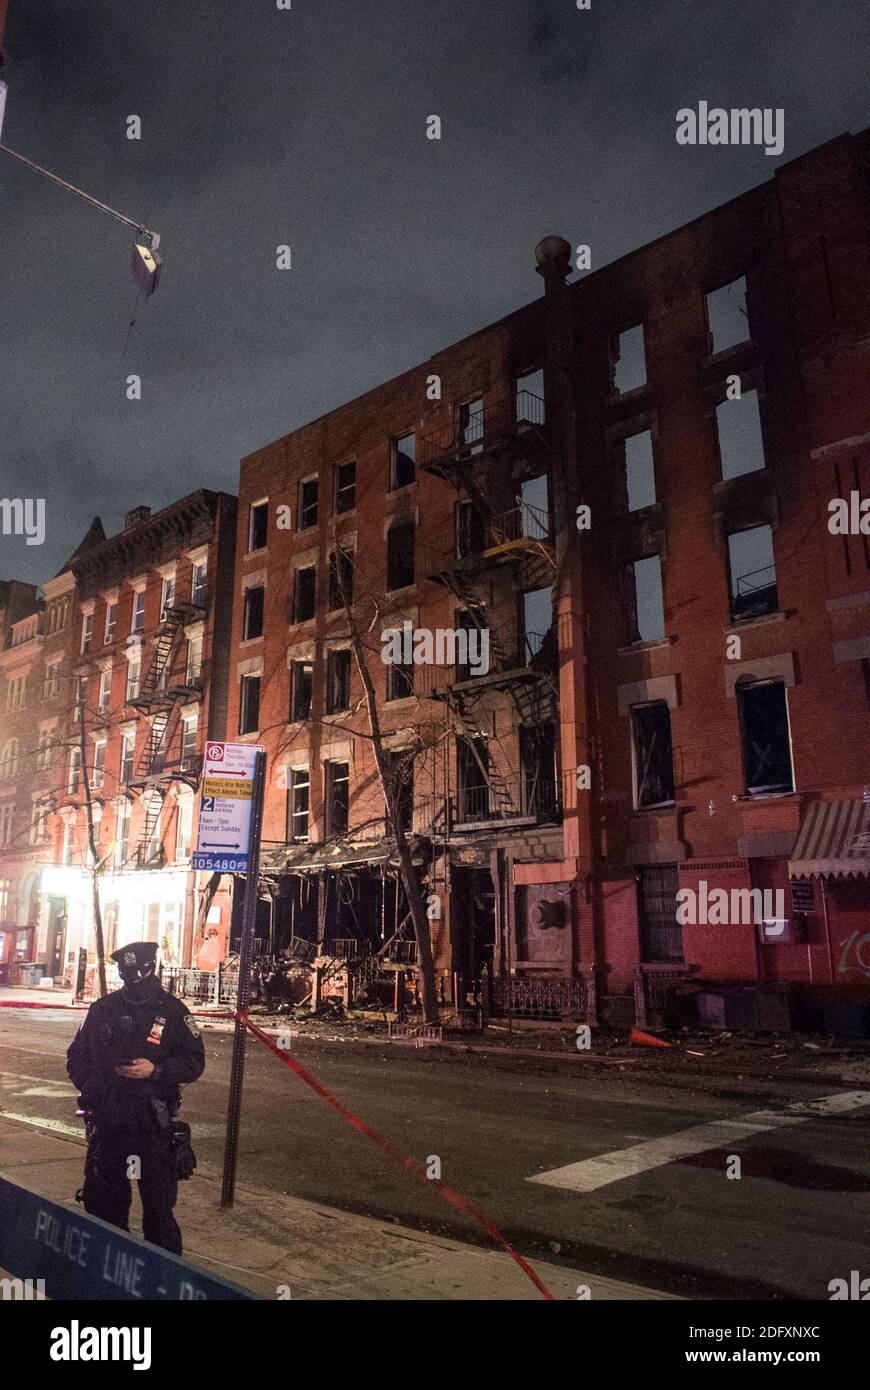 December 5, 2020, New York City, New York, U.S: Massive Fire Devastates Historic Church In East Village. The six-alarm fire started in a vacant building at East Seventh Street and Second Avenue before spreading to Middle Collegiate Church. The fire, which broke out just before 5 a.m. in a vacant building, quickly spread to Middle Collegiate Church as well as another nearby building on East Seventh Street, FDNY Assistant Chief John Hodgens said Saturday morning. Built in 1892, the church is home to the oldest congregation of the Collegiate Churches of New York, which date to the Dutch settlemen Stock Photo